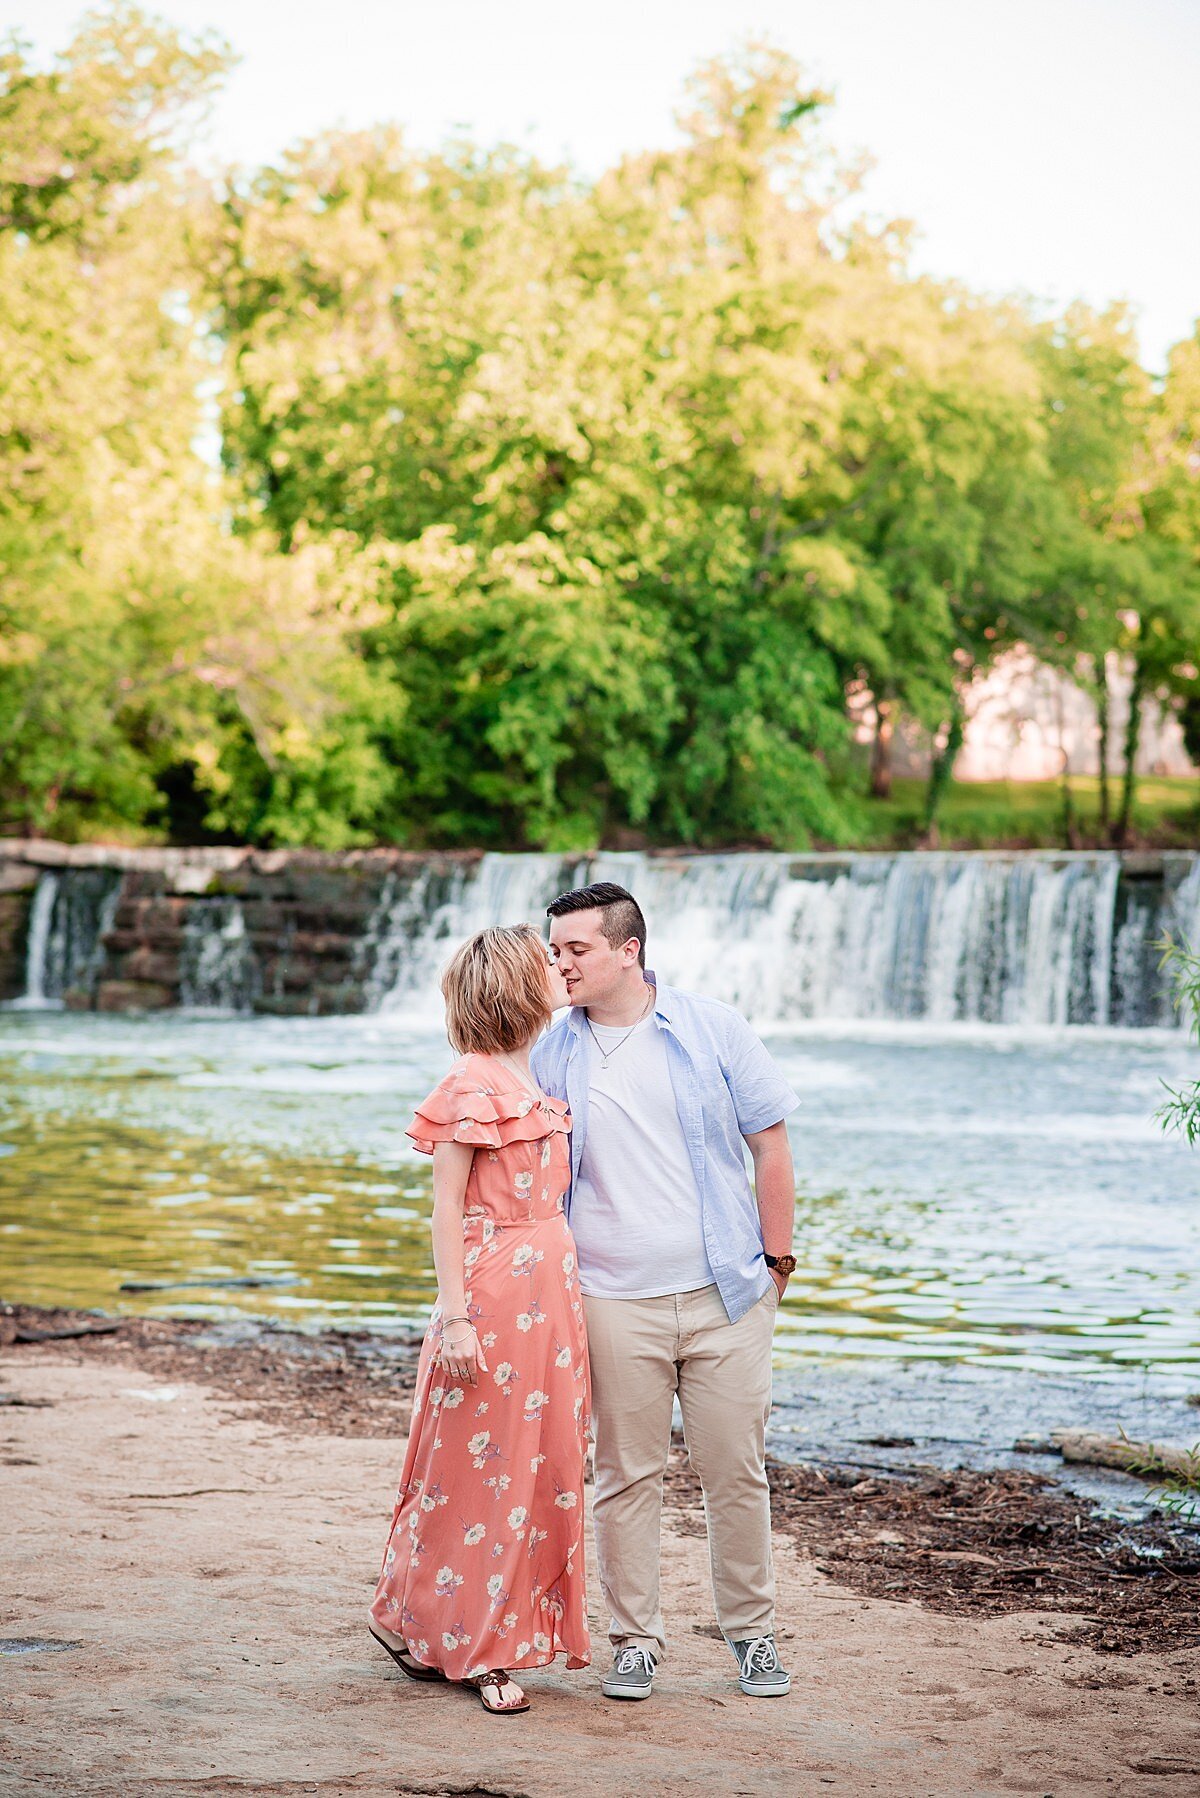 The bride and groom kiss in front of a waterfall. The groom has his arm around the bride's waist  and his hand in his pocket. He is wearing gray sneakers, khaki pants, a white t-shirt with a blue short sleeved shirt. The bride is wearing an off the shoulder floor length peach dress with a white floral pattern. She has two layers of ruffles around her shoulders.